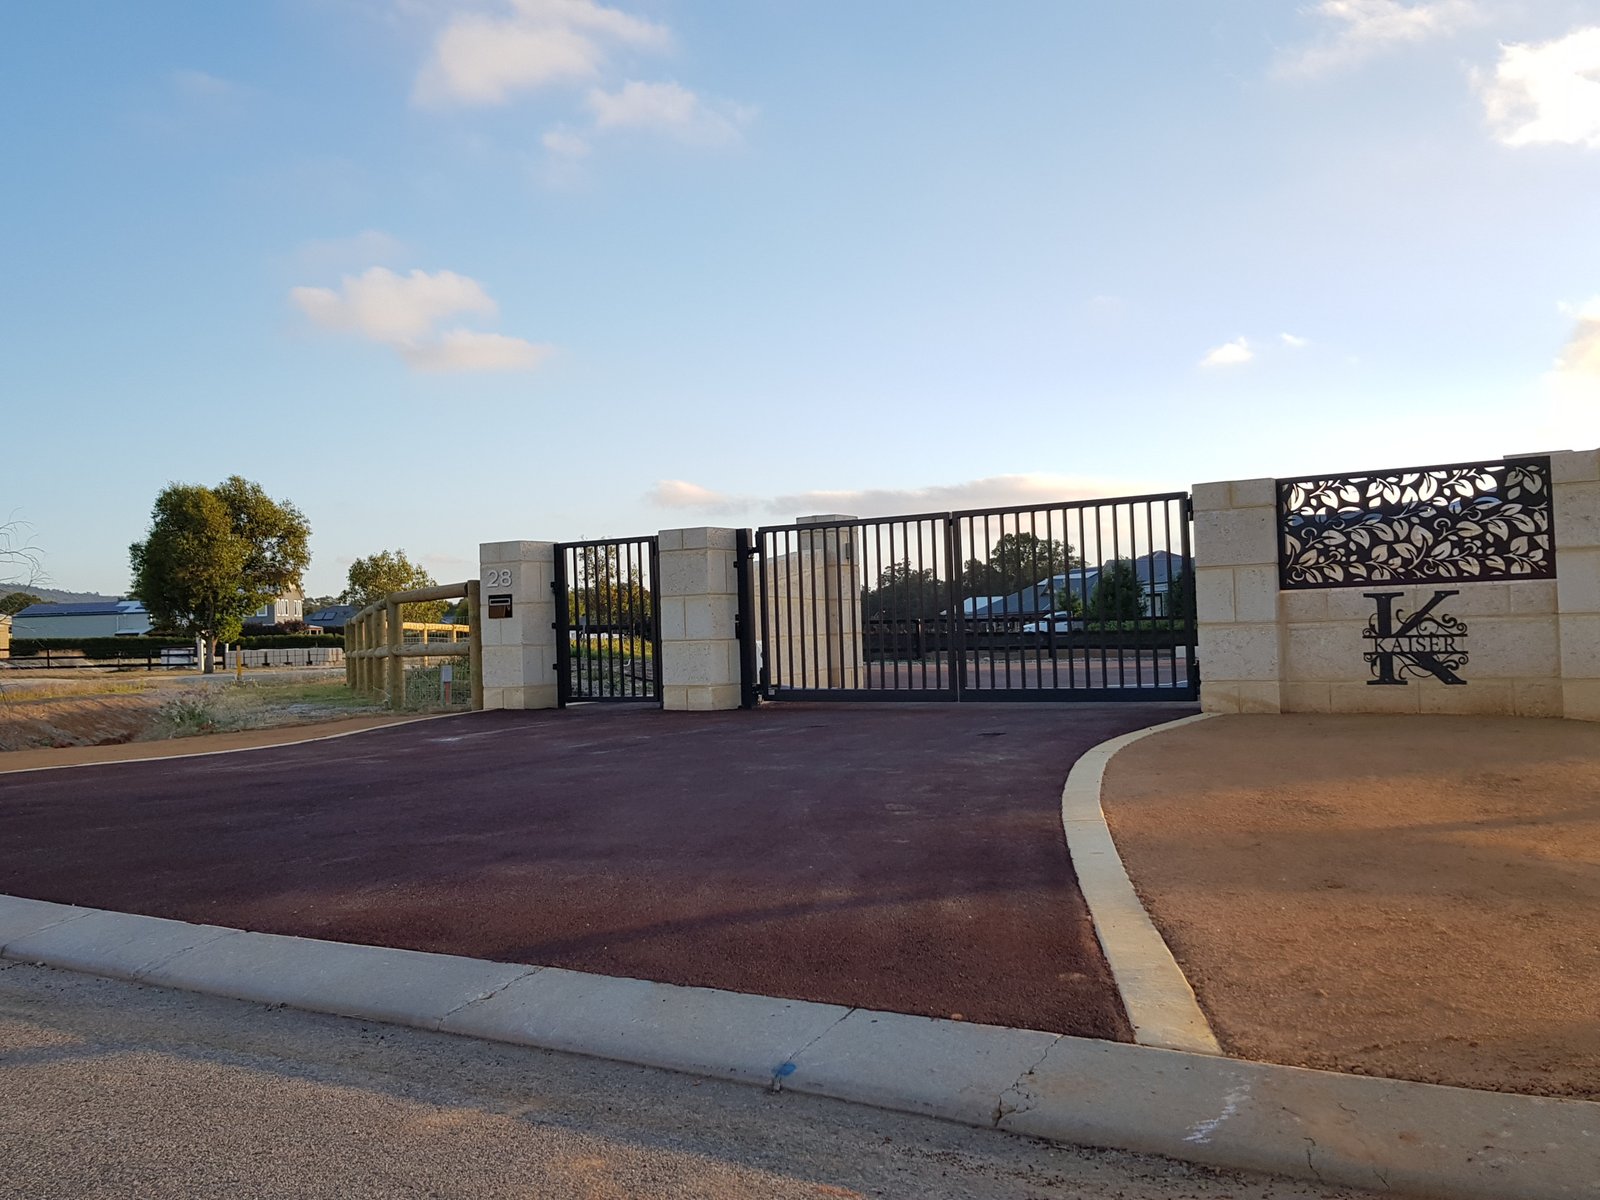 Darling Downs Entry, Rural Landscaping Company Project, Landscaping Perth